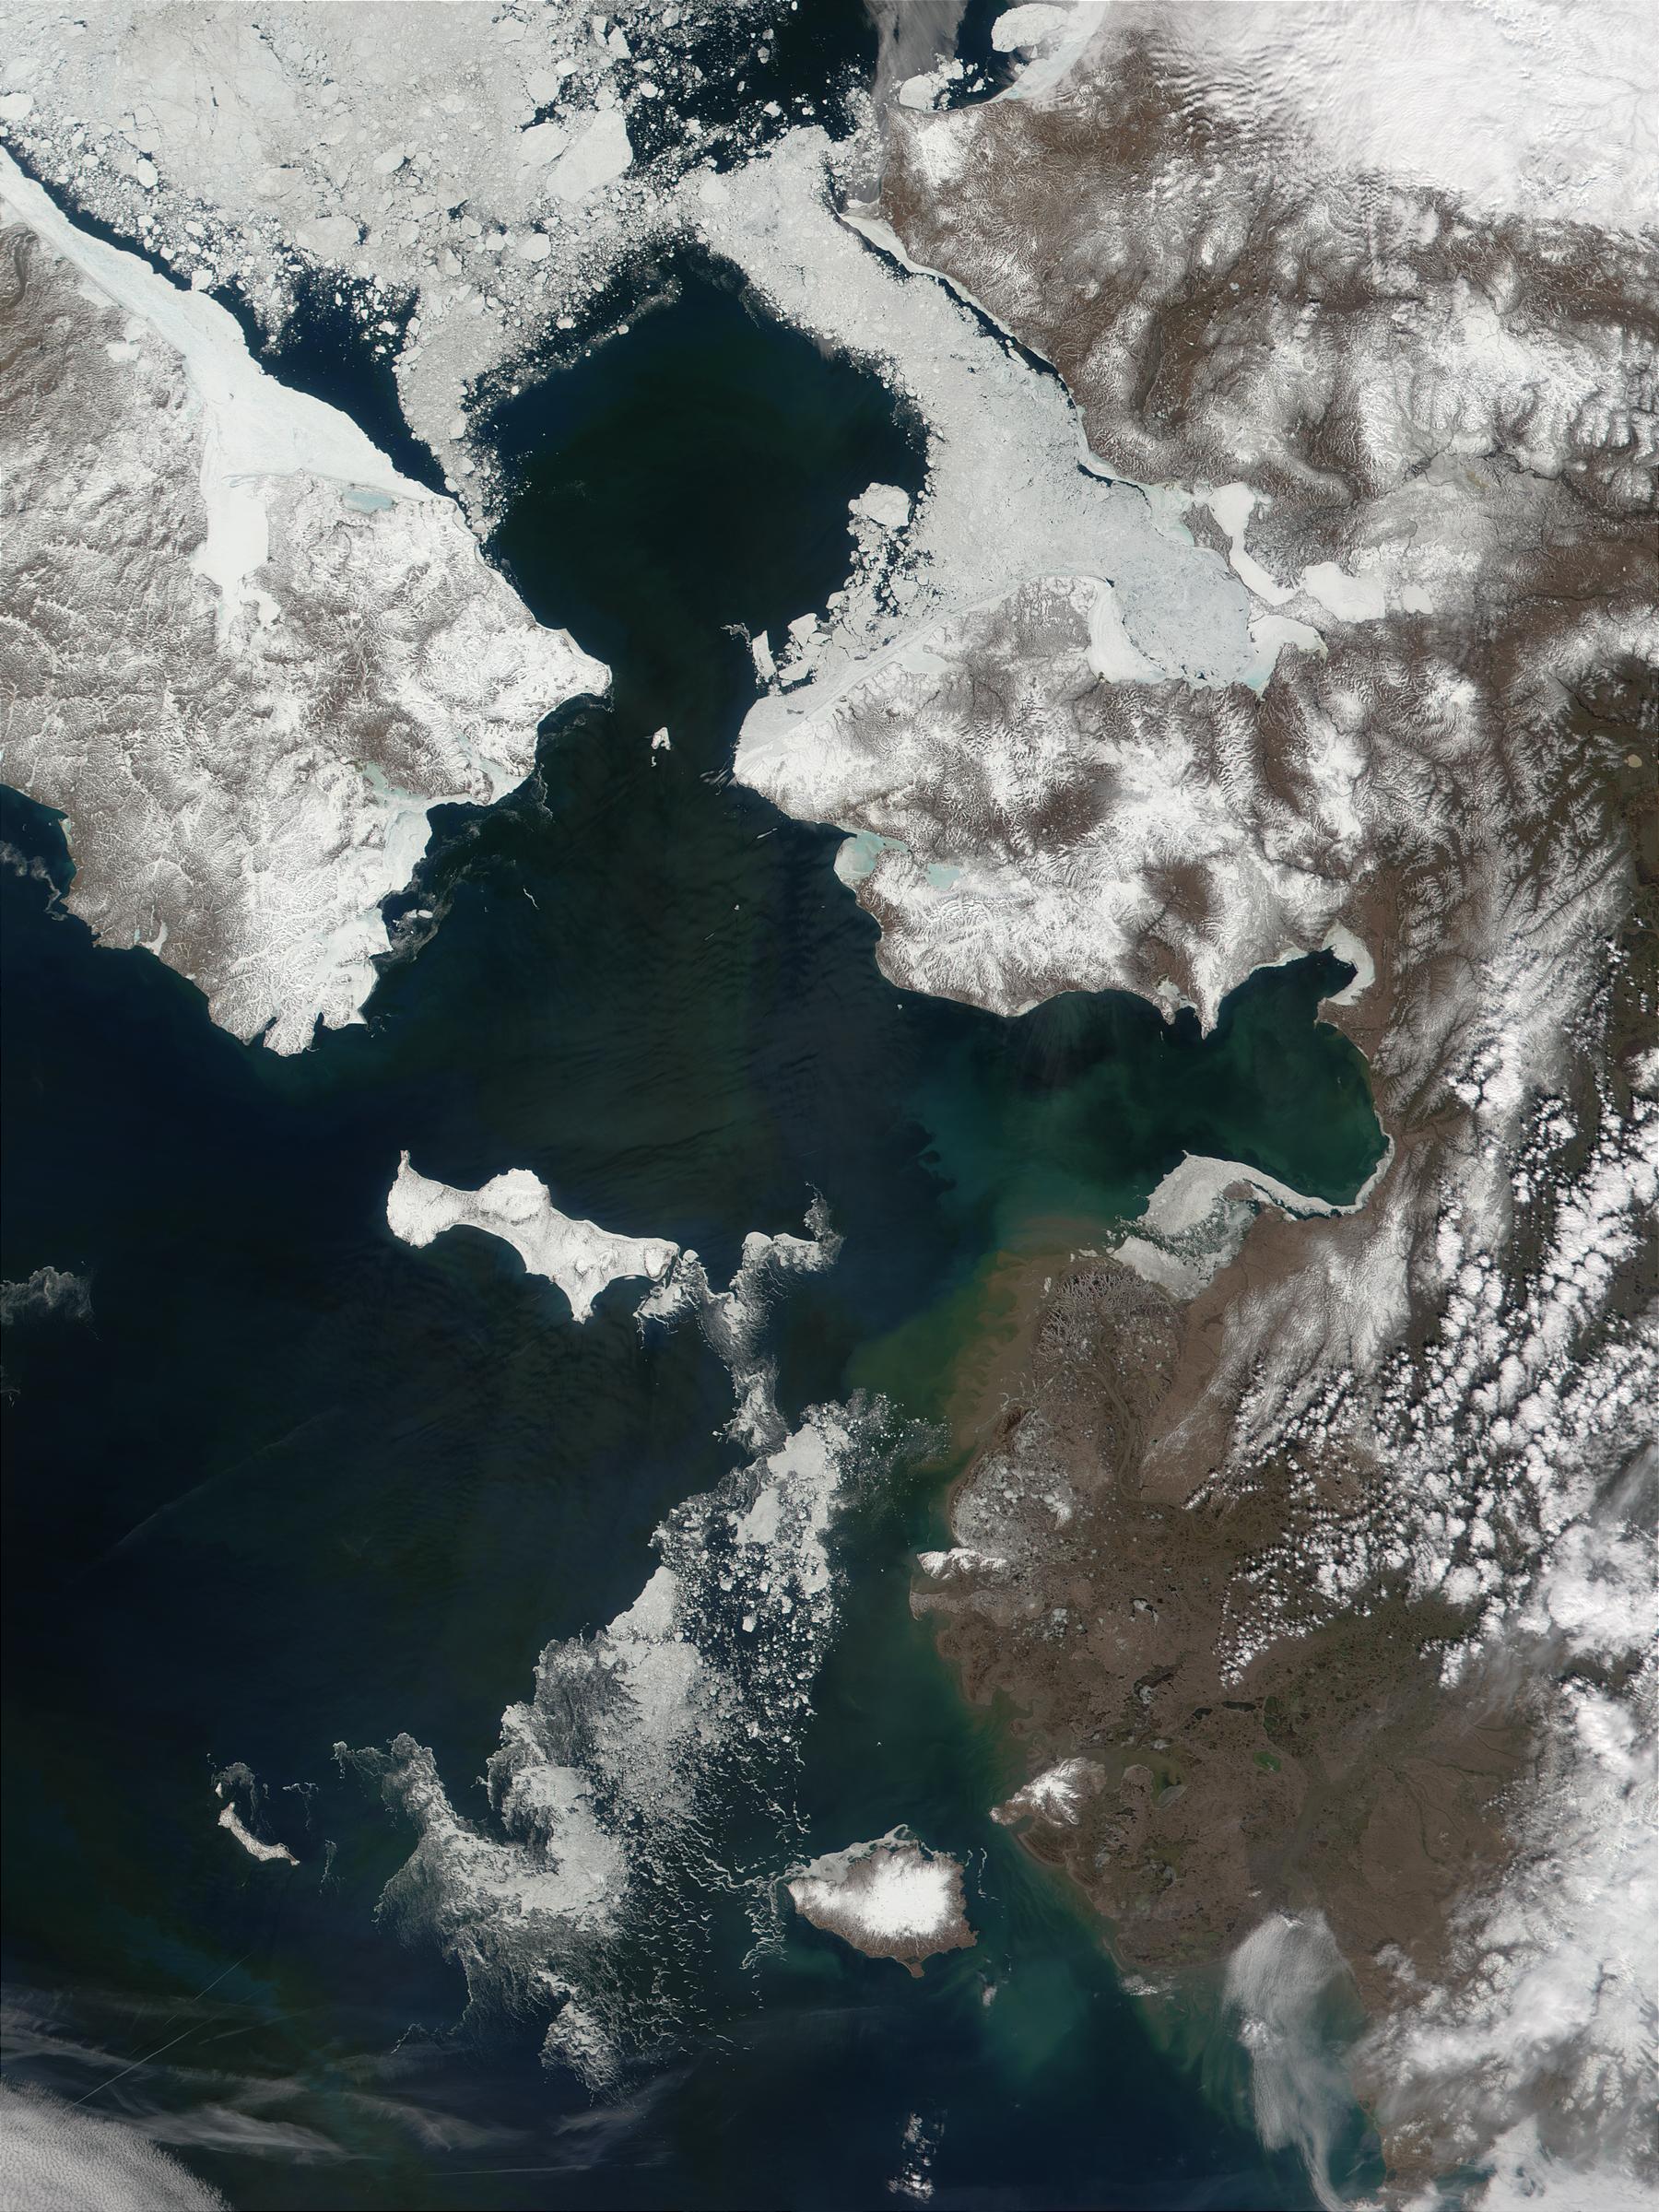 Bering Strait, Alaska and Russia - related image preview